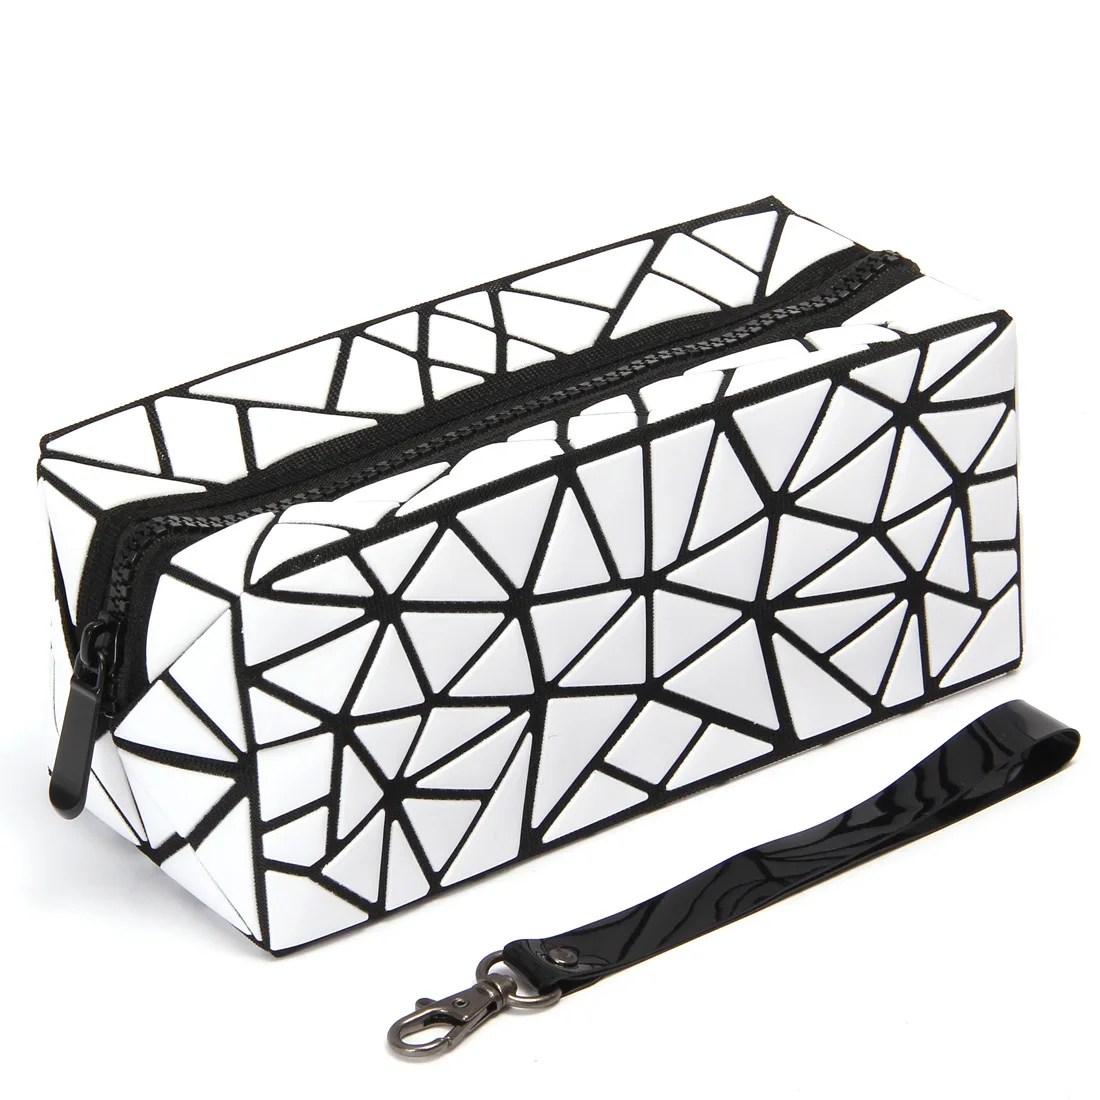 

Hot Geometric Rhombus Folding Pencil Bag Cosmetic Make Up Case Bag For Ladies, As pictures